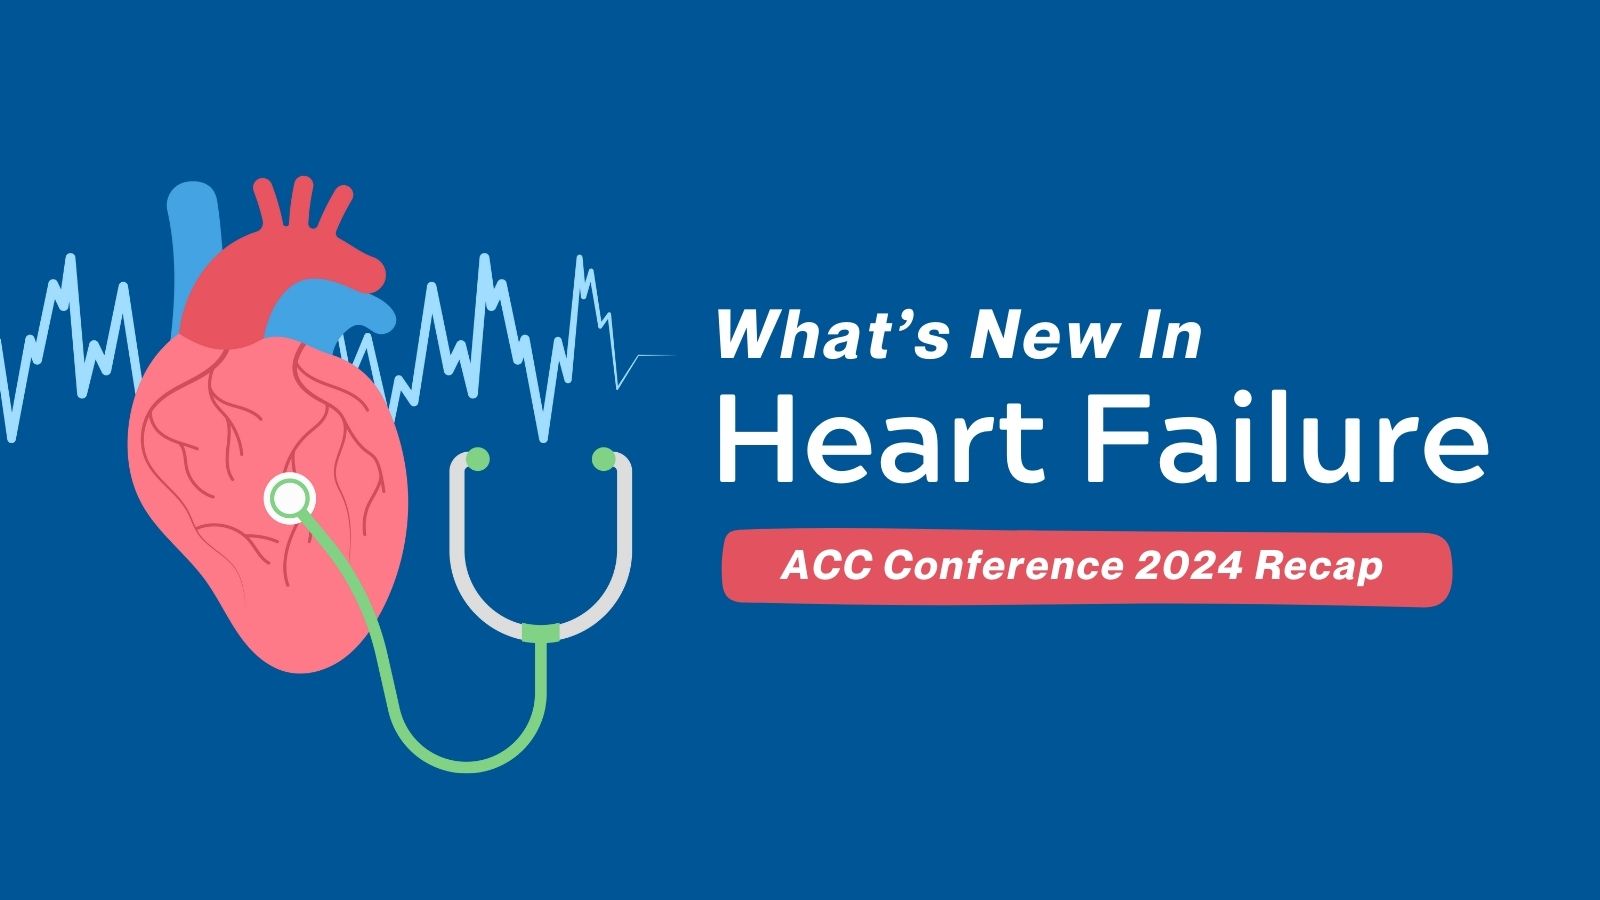 ACC Annual Conference 2024 - What's New in Heart Failure